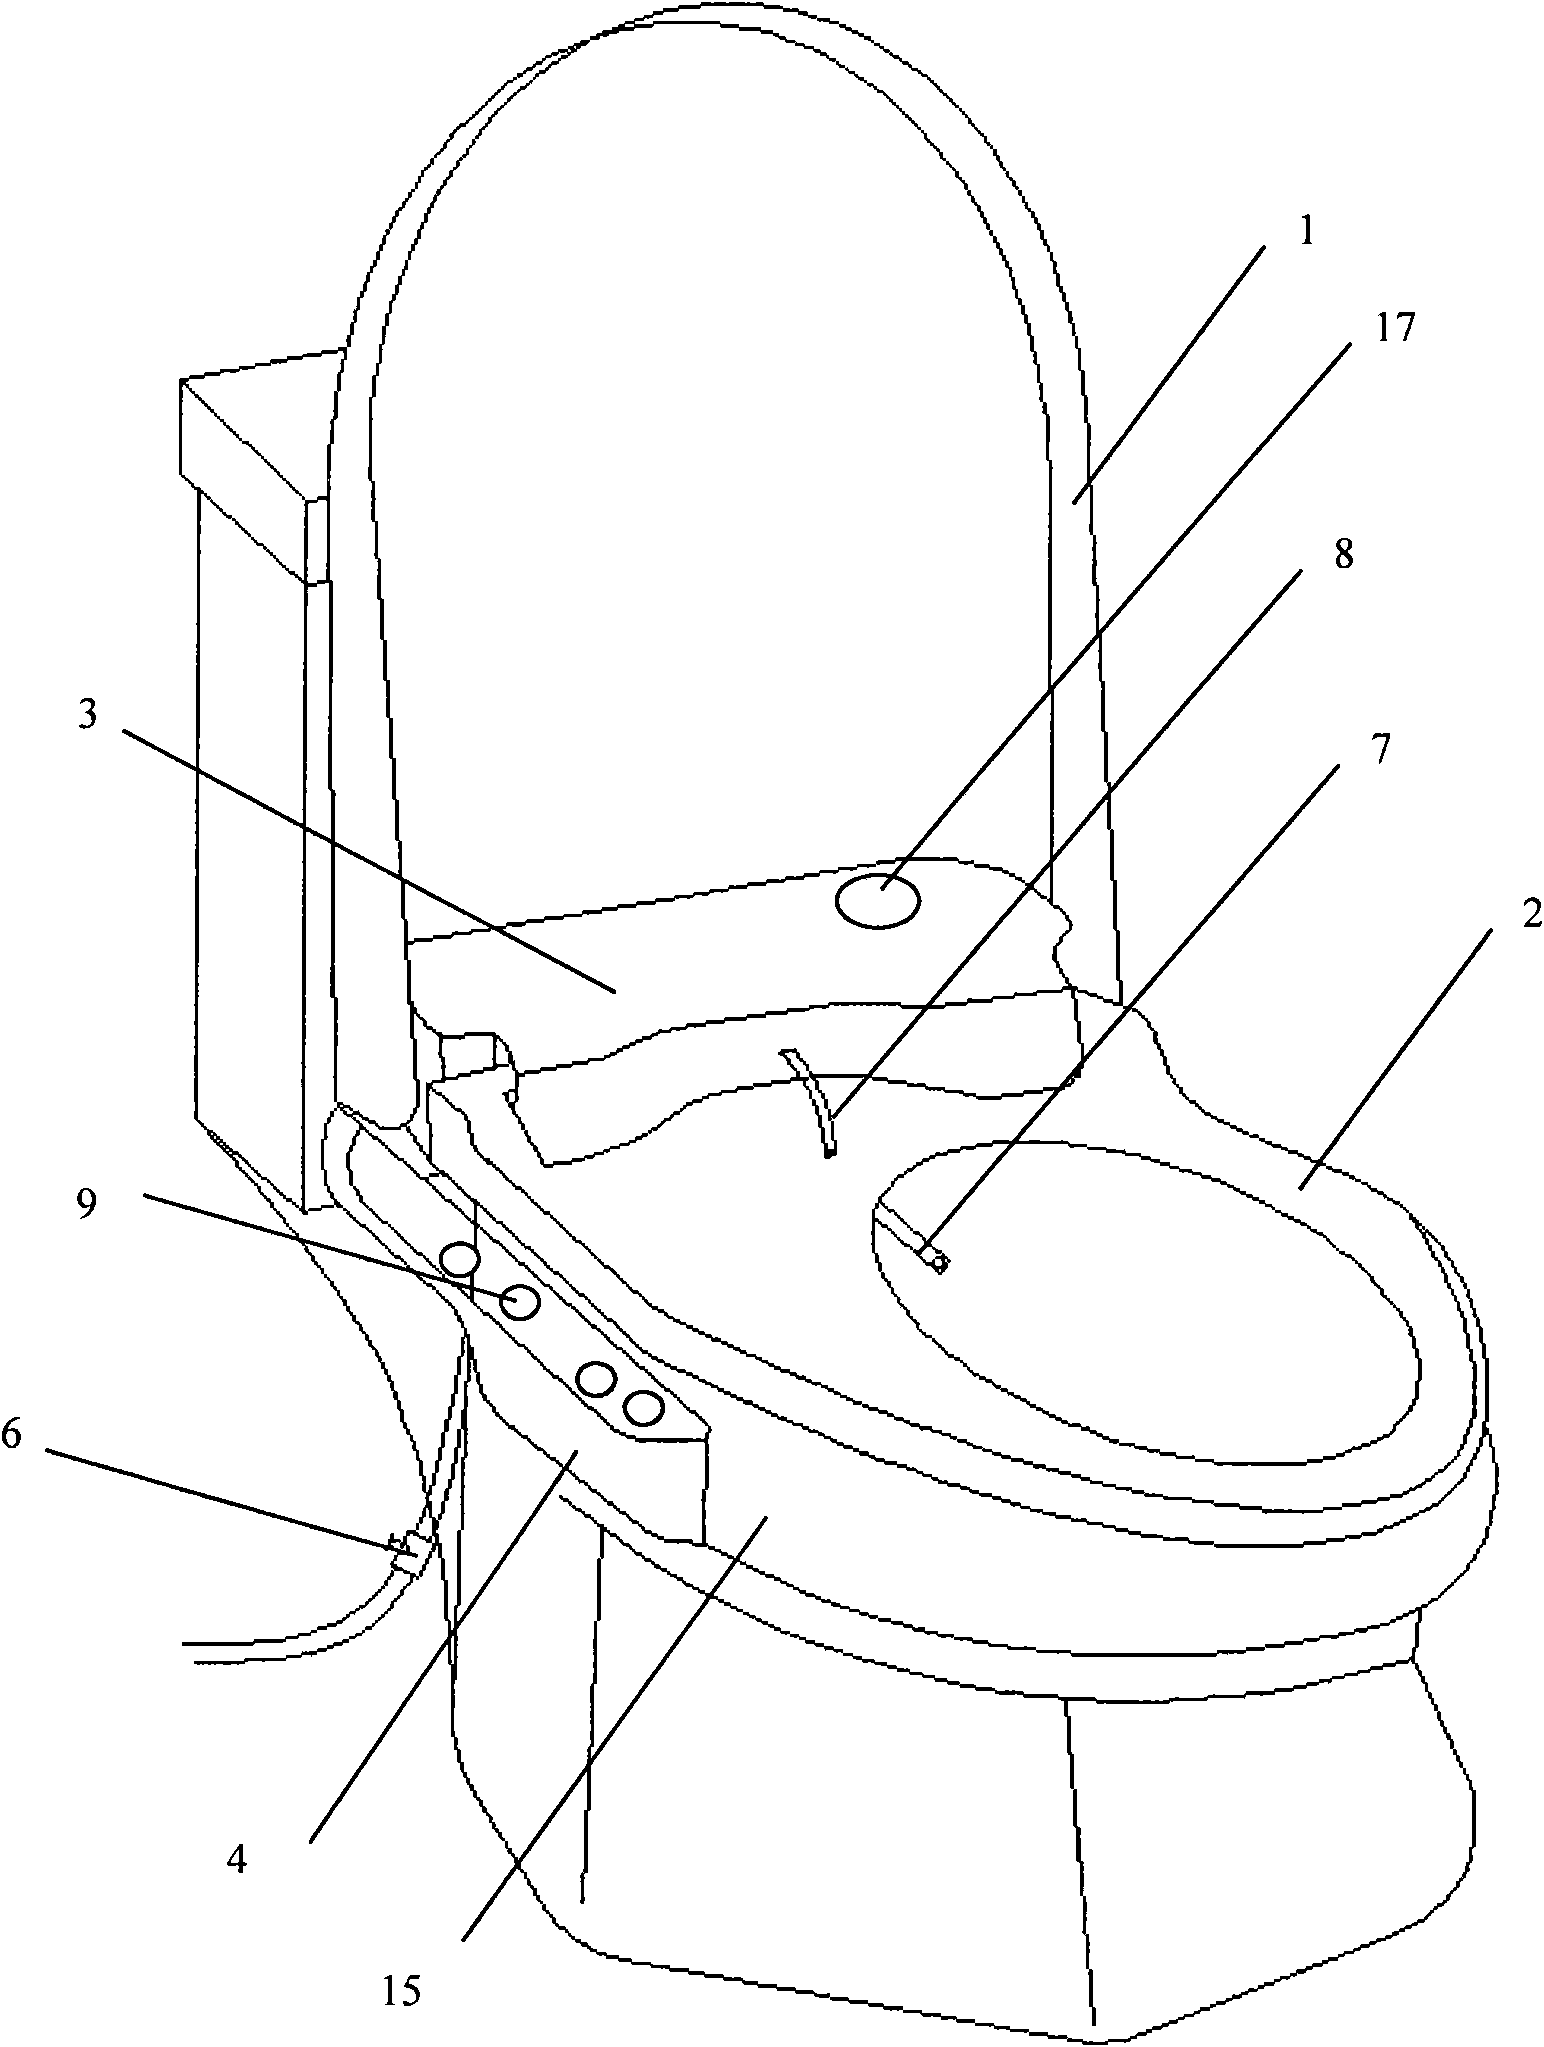 Toilet stool with flushing and hip-bathing functions